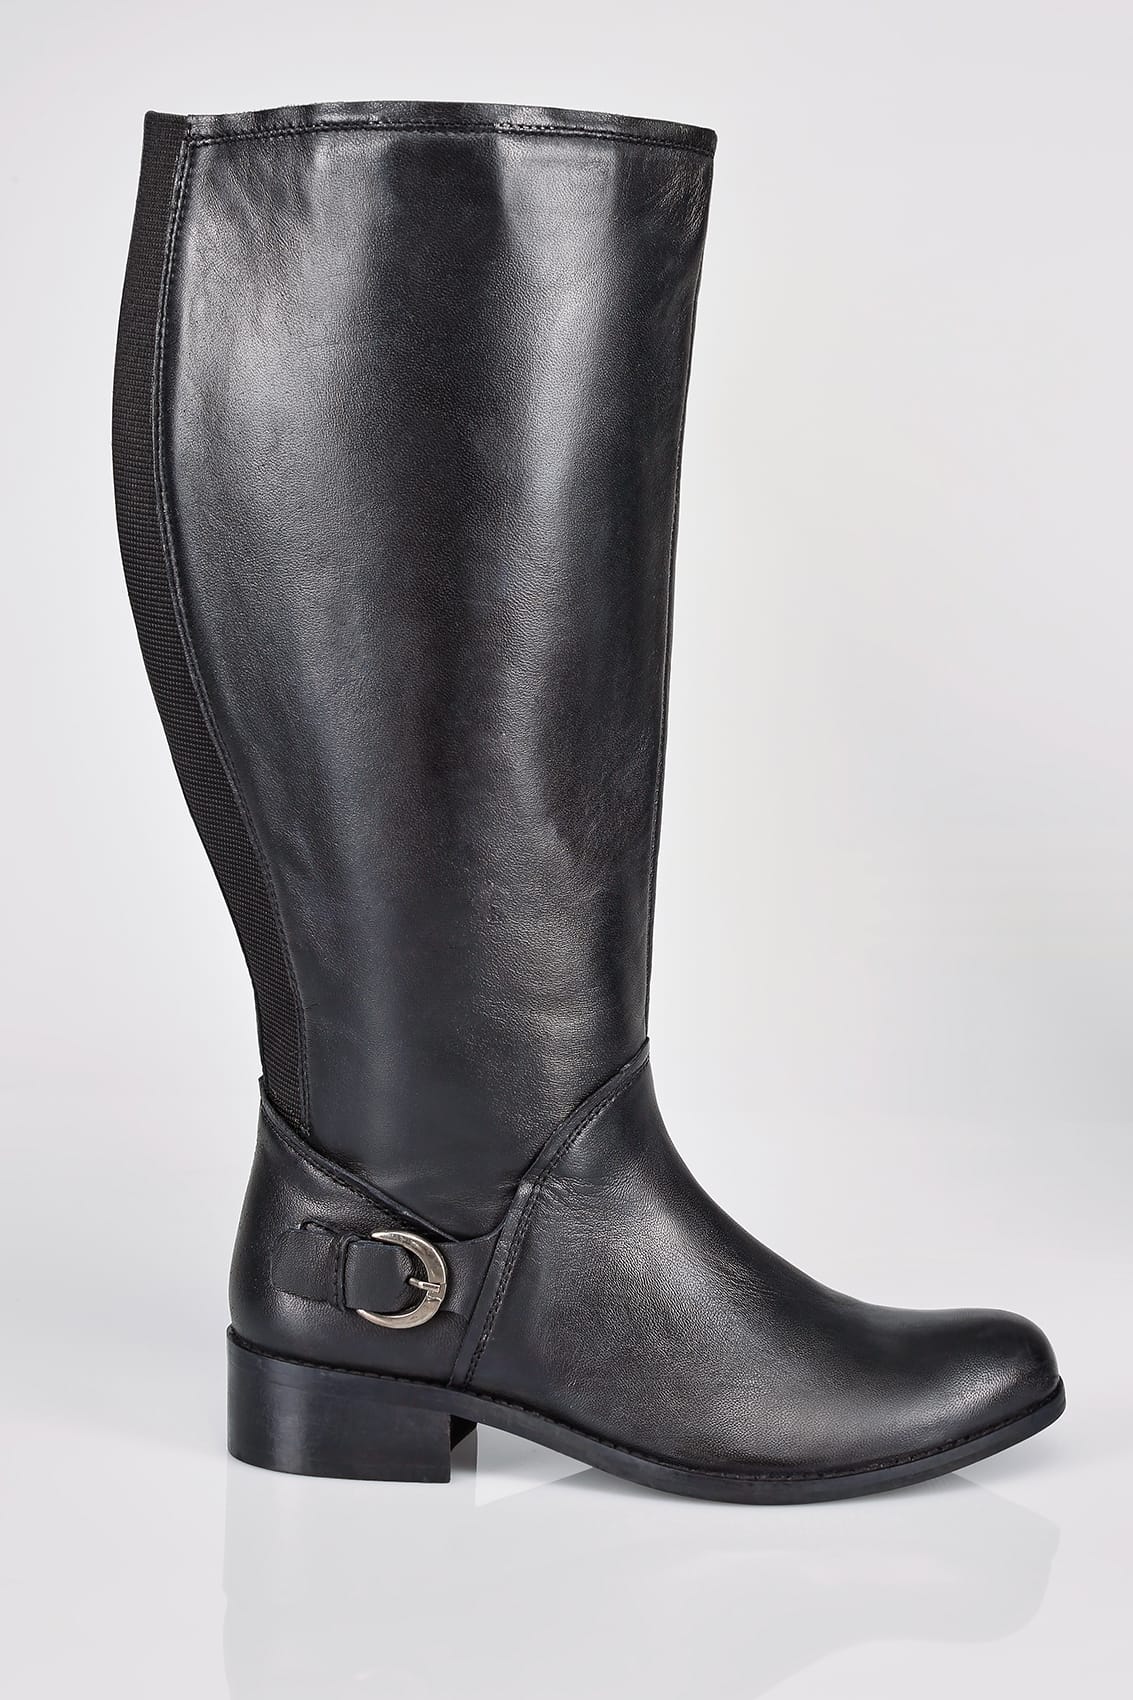 Black Leather Knee High Riding Boots With Buckle Detail In EEE Fit